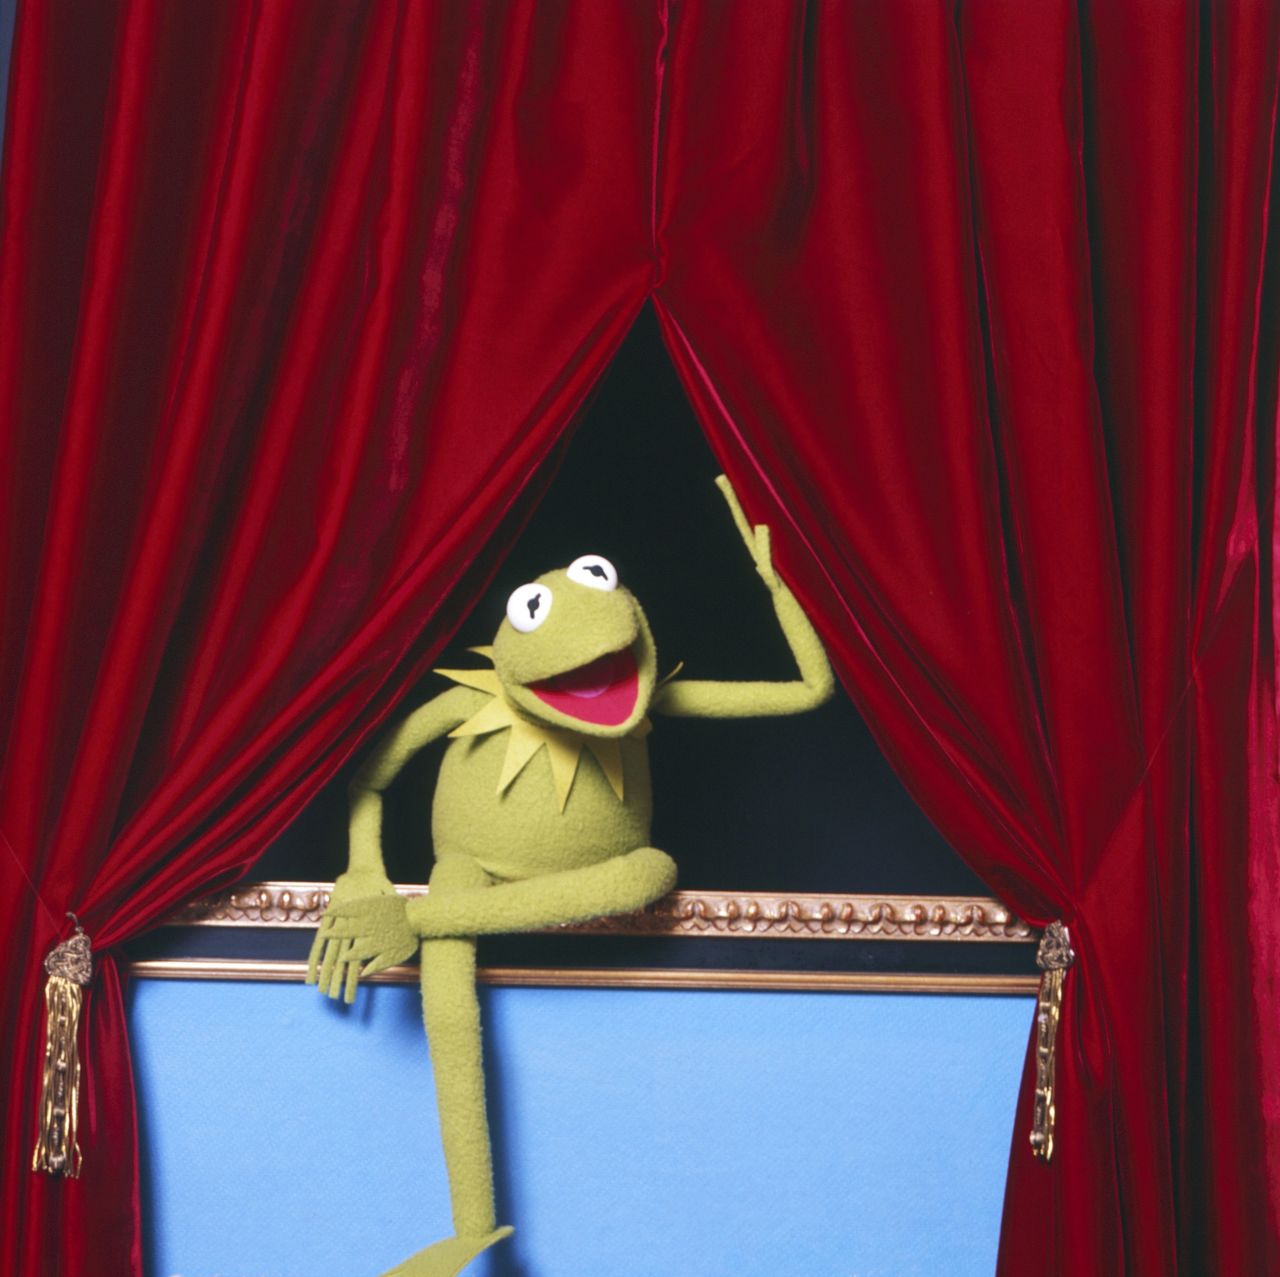 <strong>"The Muppet Show"</strong>: It's time to play the music, it's time to light the lights. Revisit our favorite Muppet moments with the seasons of the beloved TV show from puppeteer Jim Henson. <strong>(Disney+)</strong>